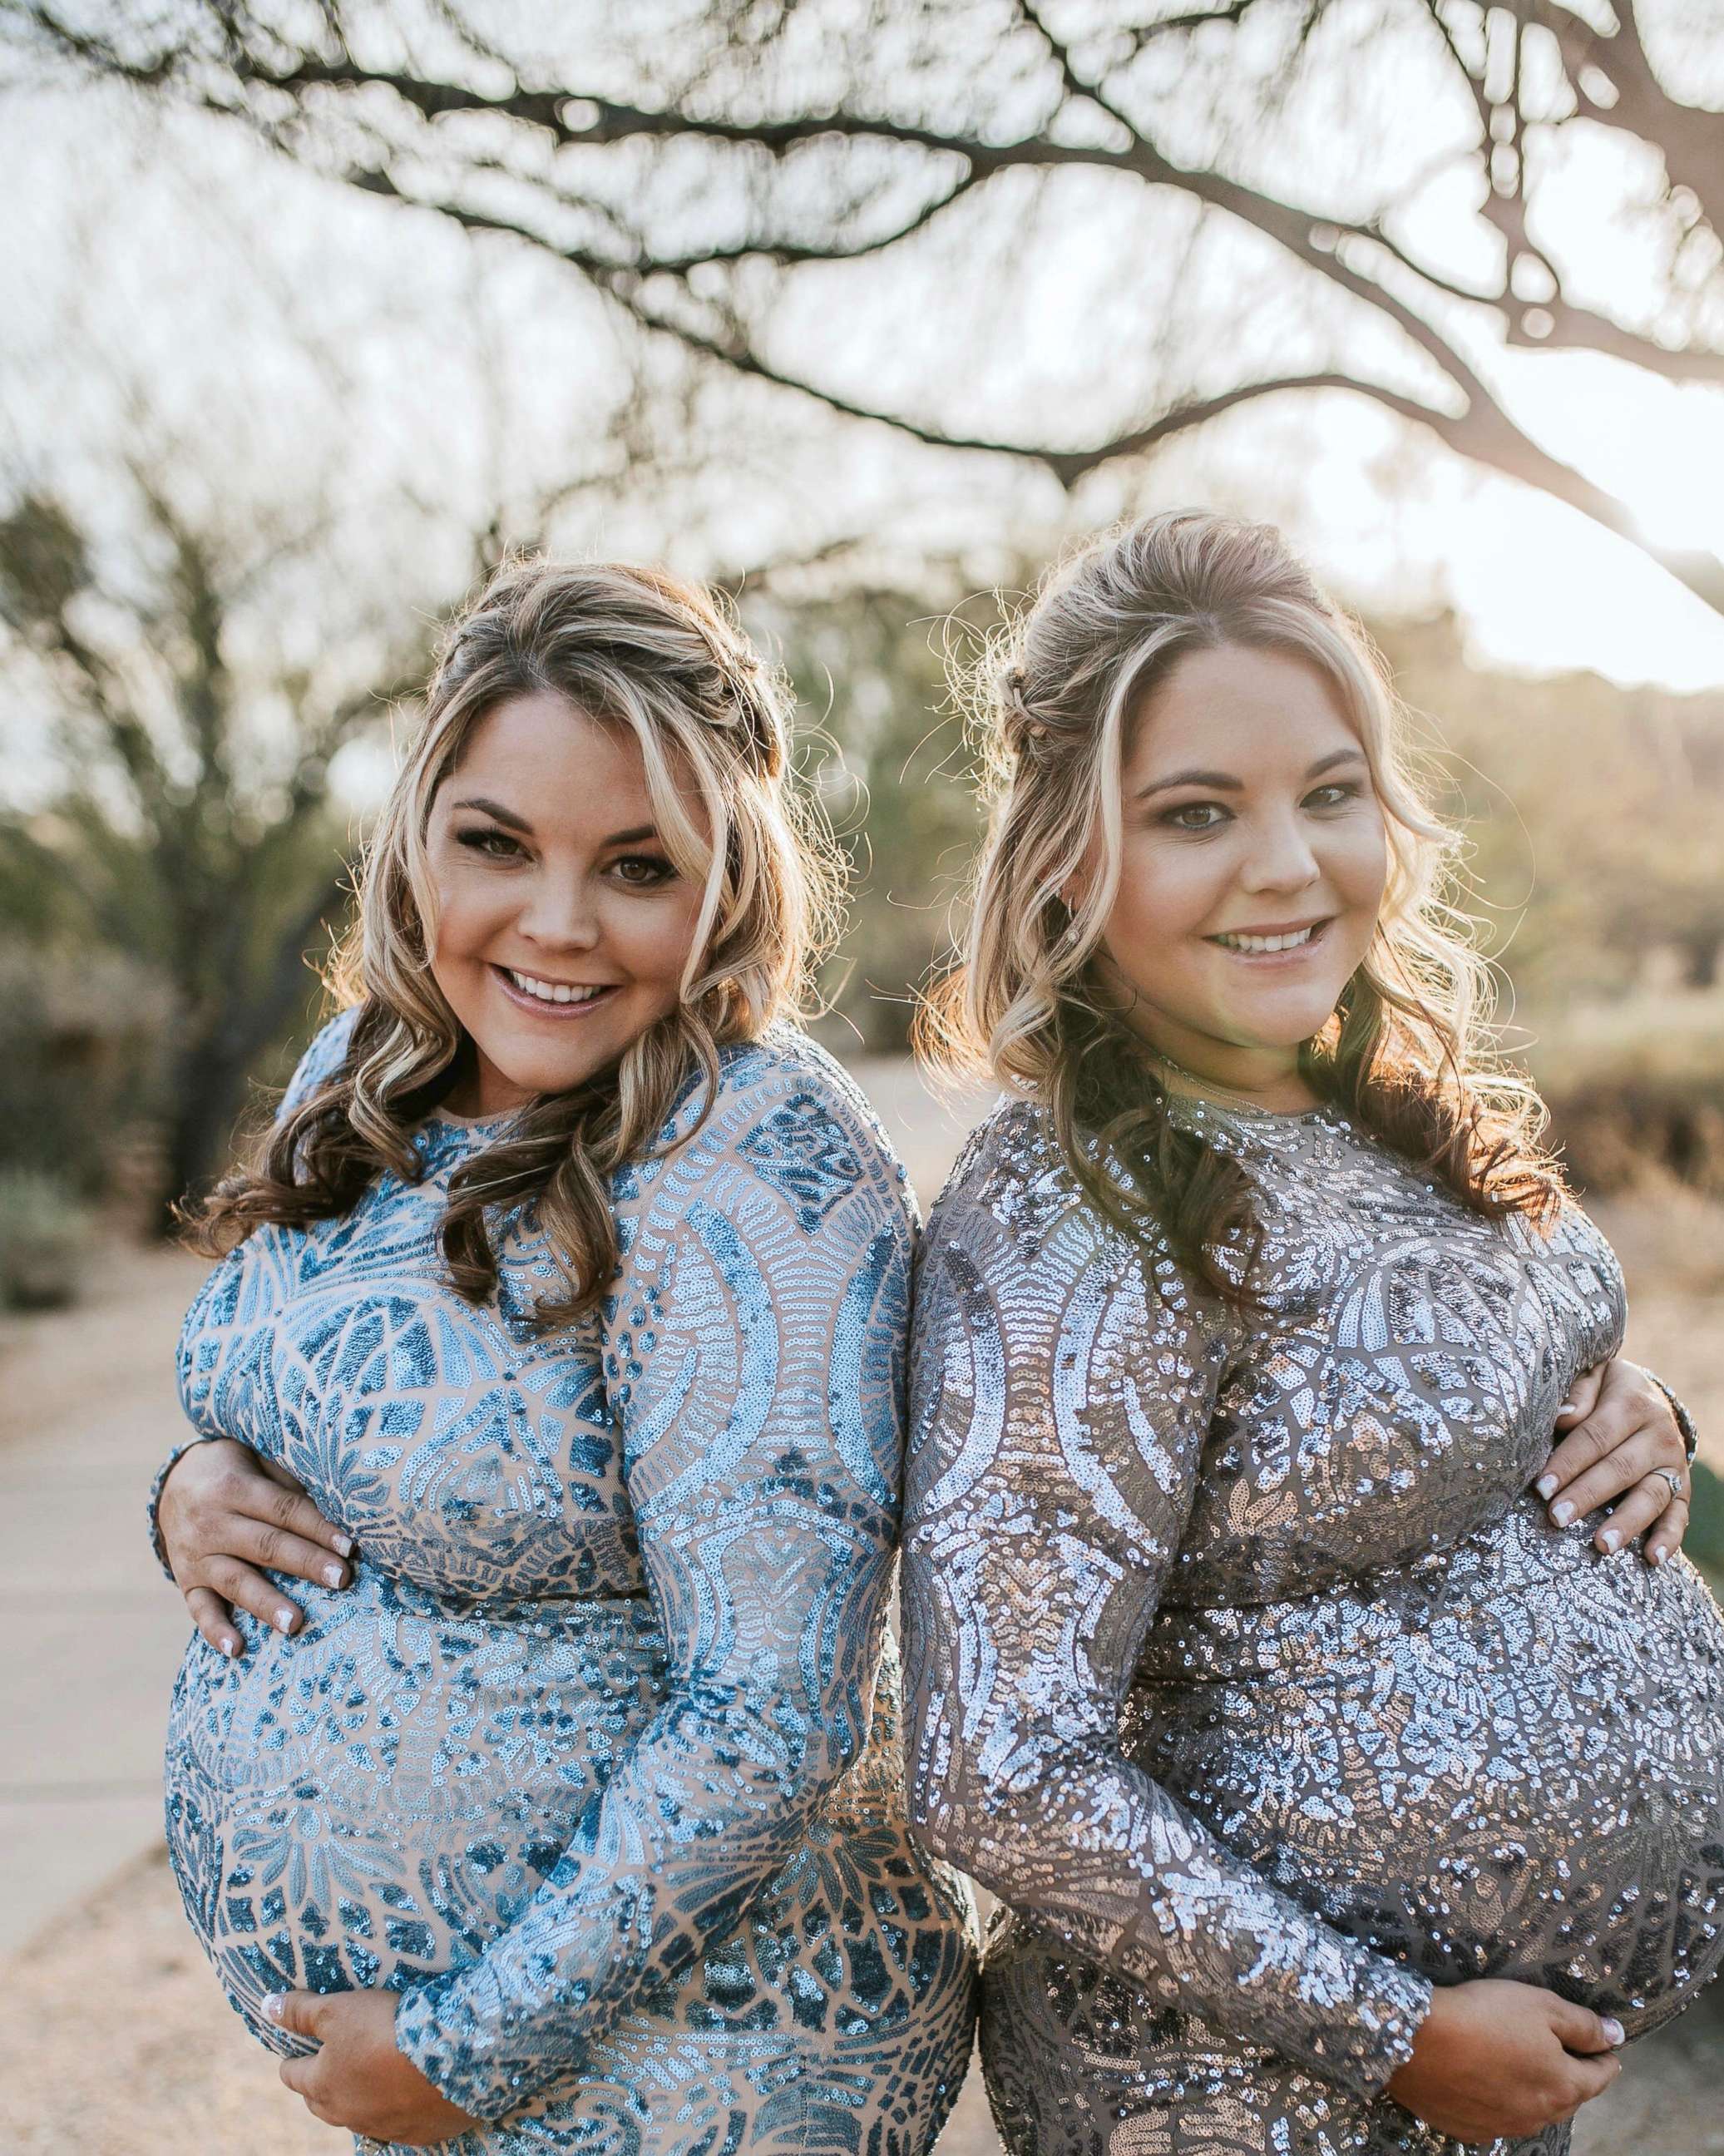 PHOTO: Jalynne Crawford and Janelle Leopoldo pregnant with their sons.